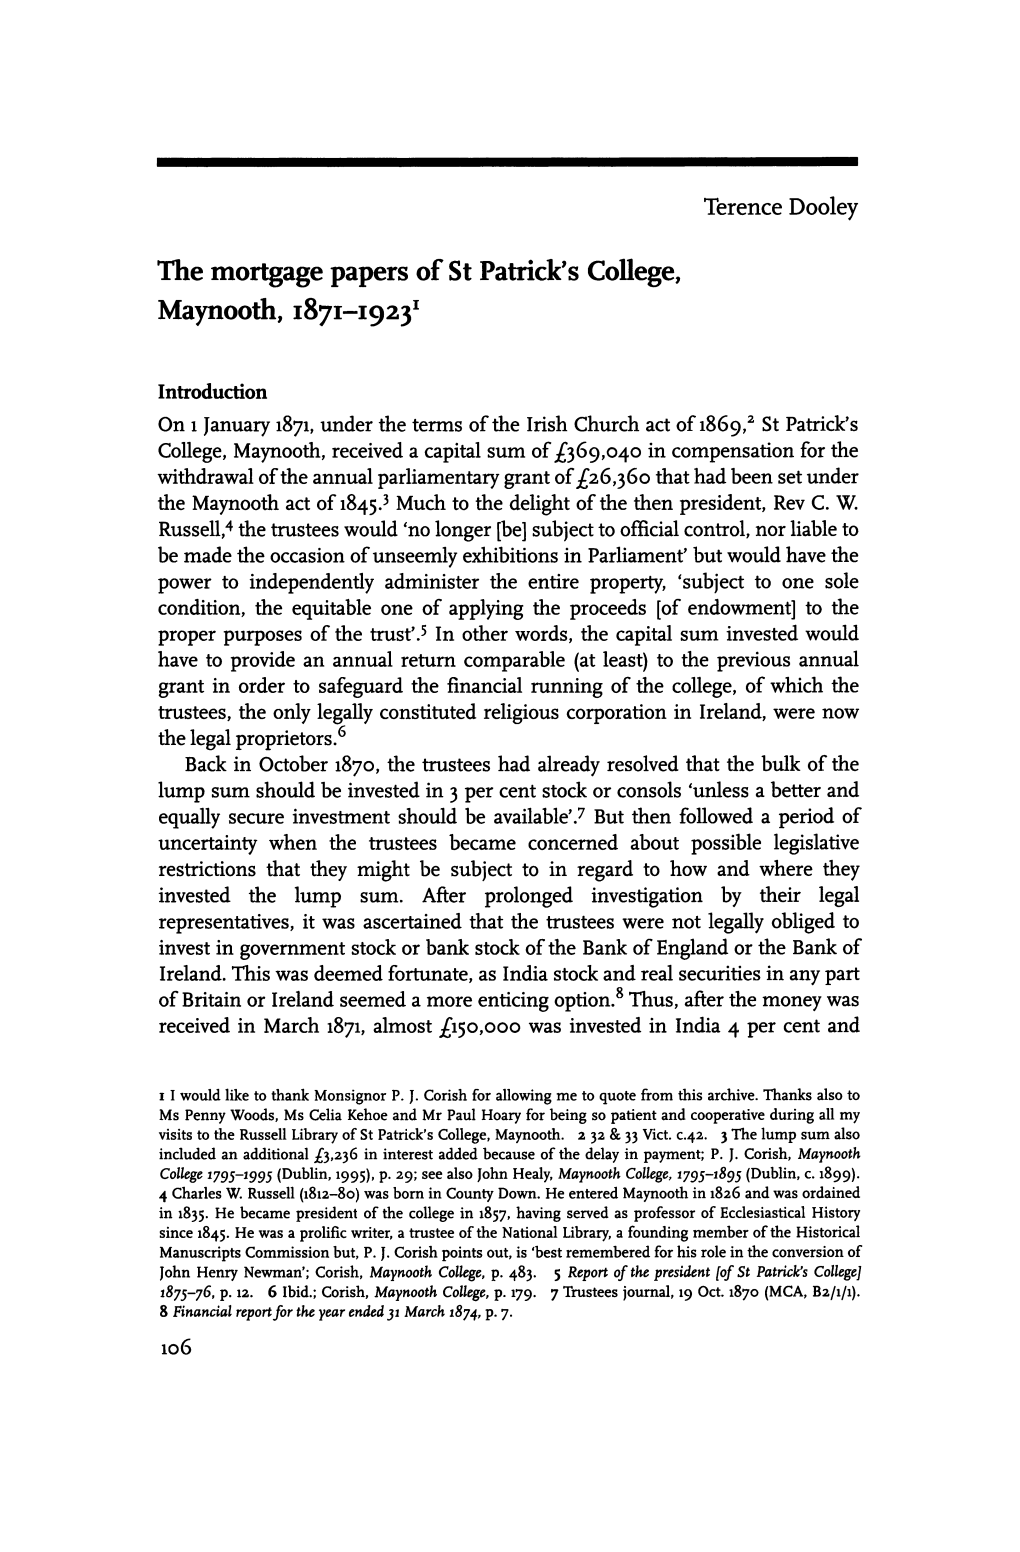 The Mortgage Papers of St Patrick's College, Maynooth, 1871-1923